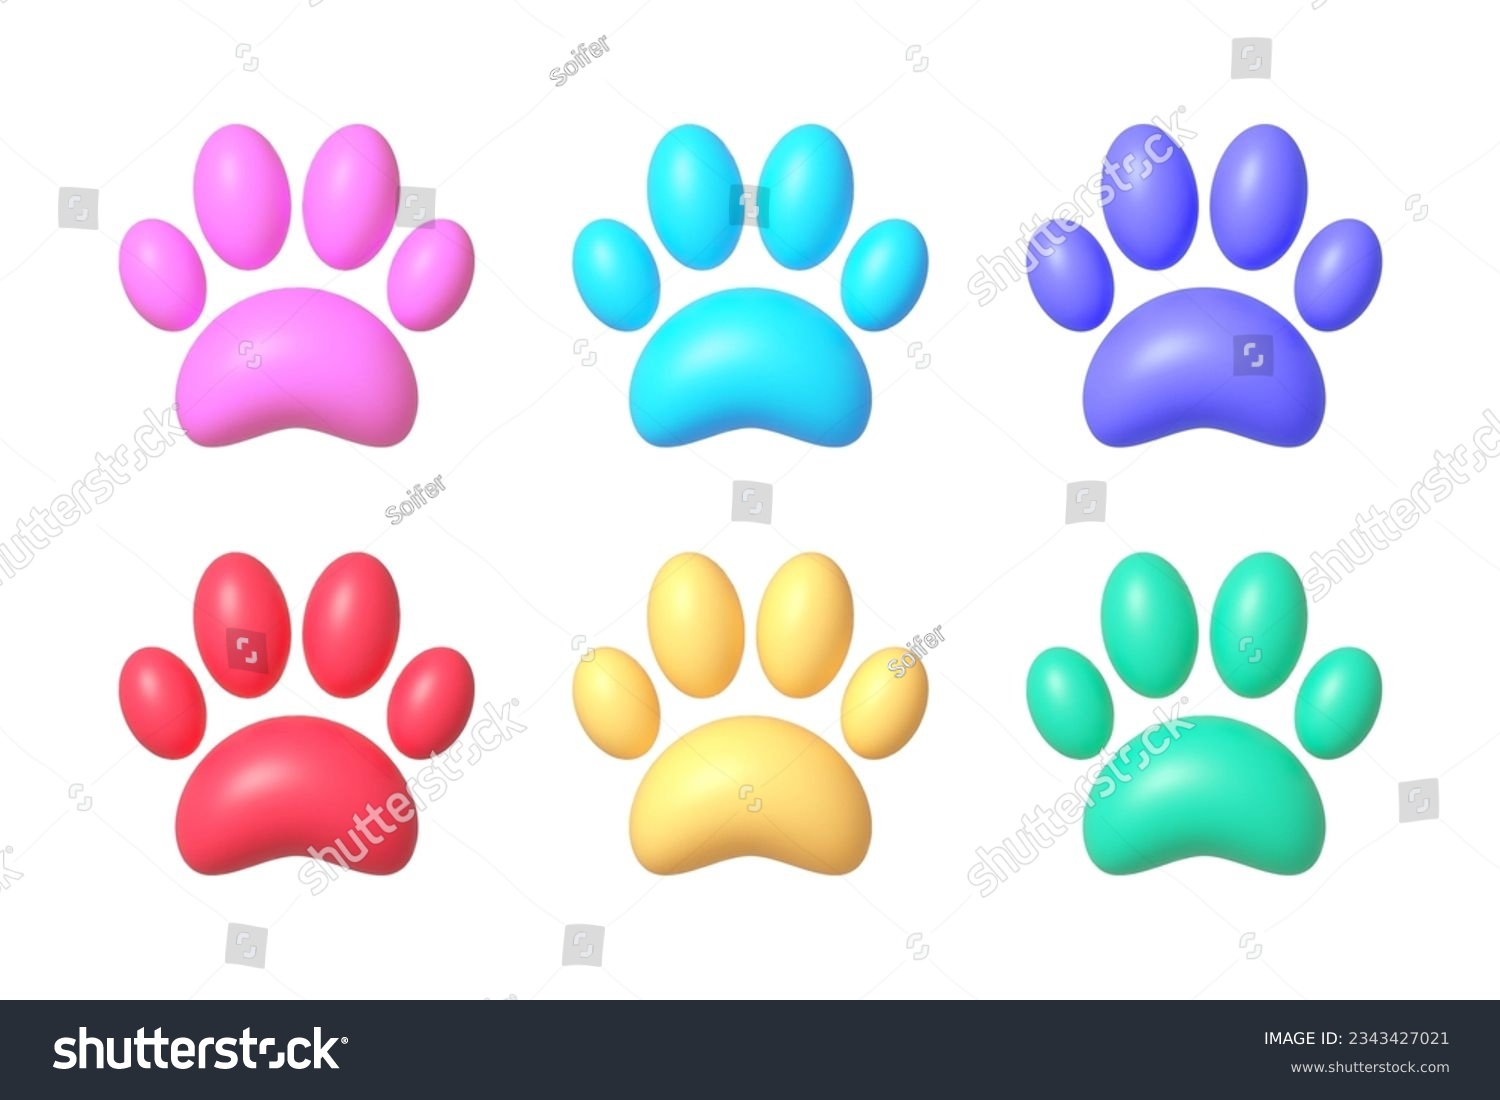 SVG of Paw 3d set on white background. Dog, puppy, cat, bear, wolf silhouette. Vector isolated illustration svg